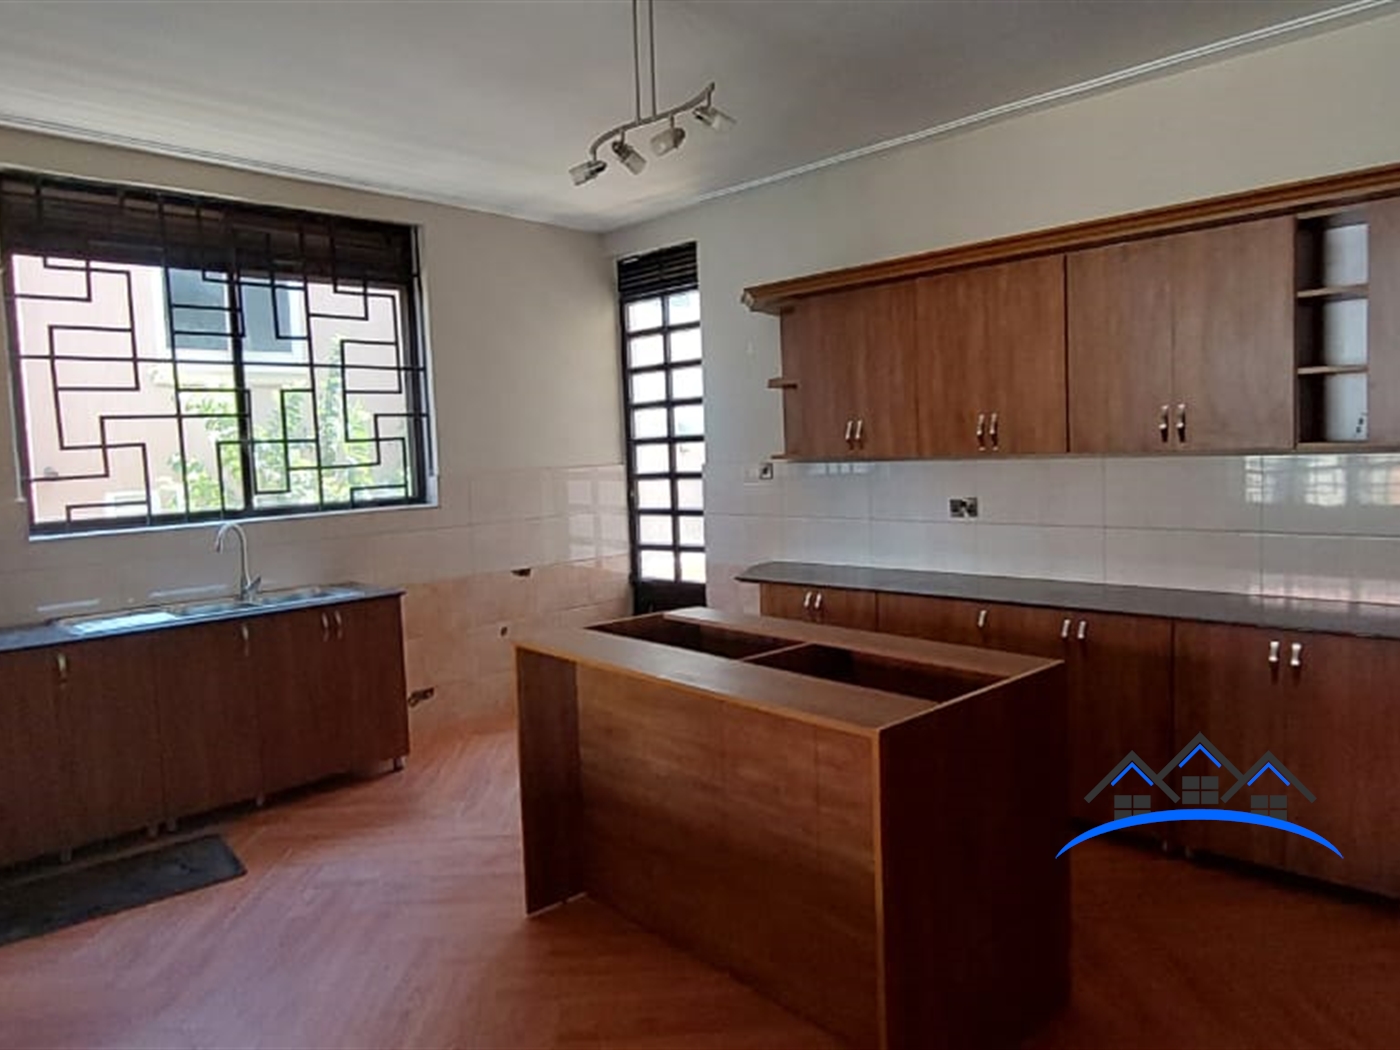 Mansion for sale in Mulawa Wakiso